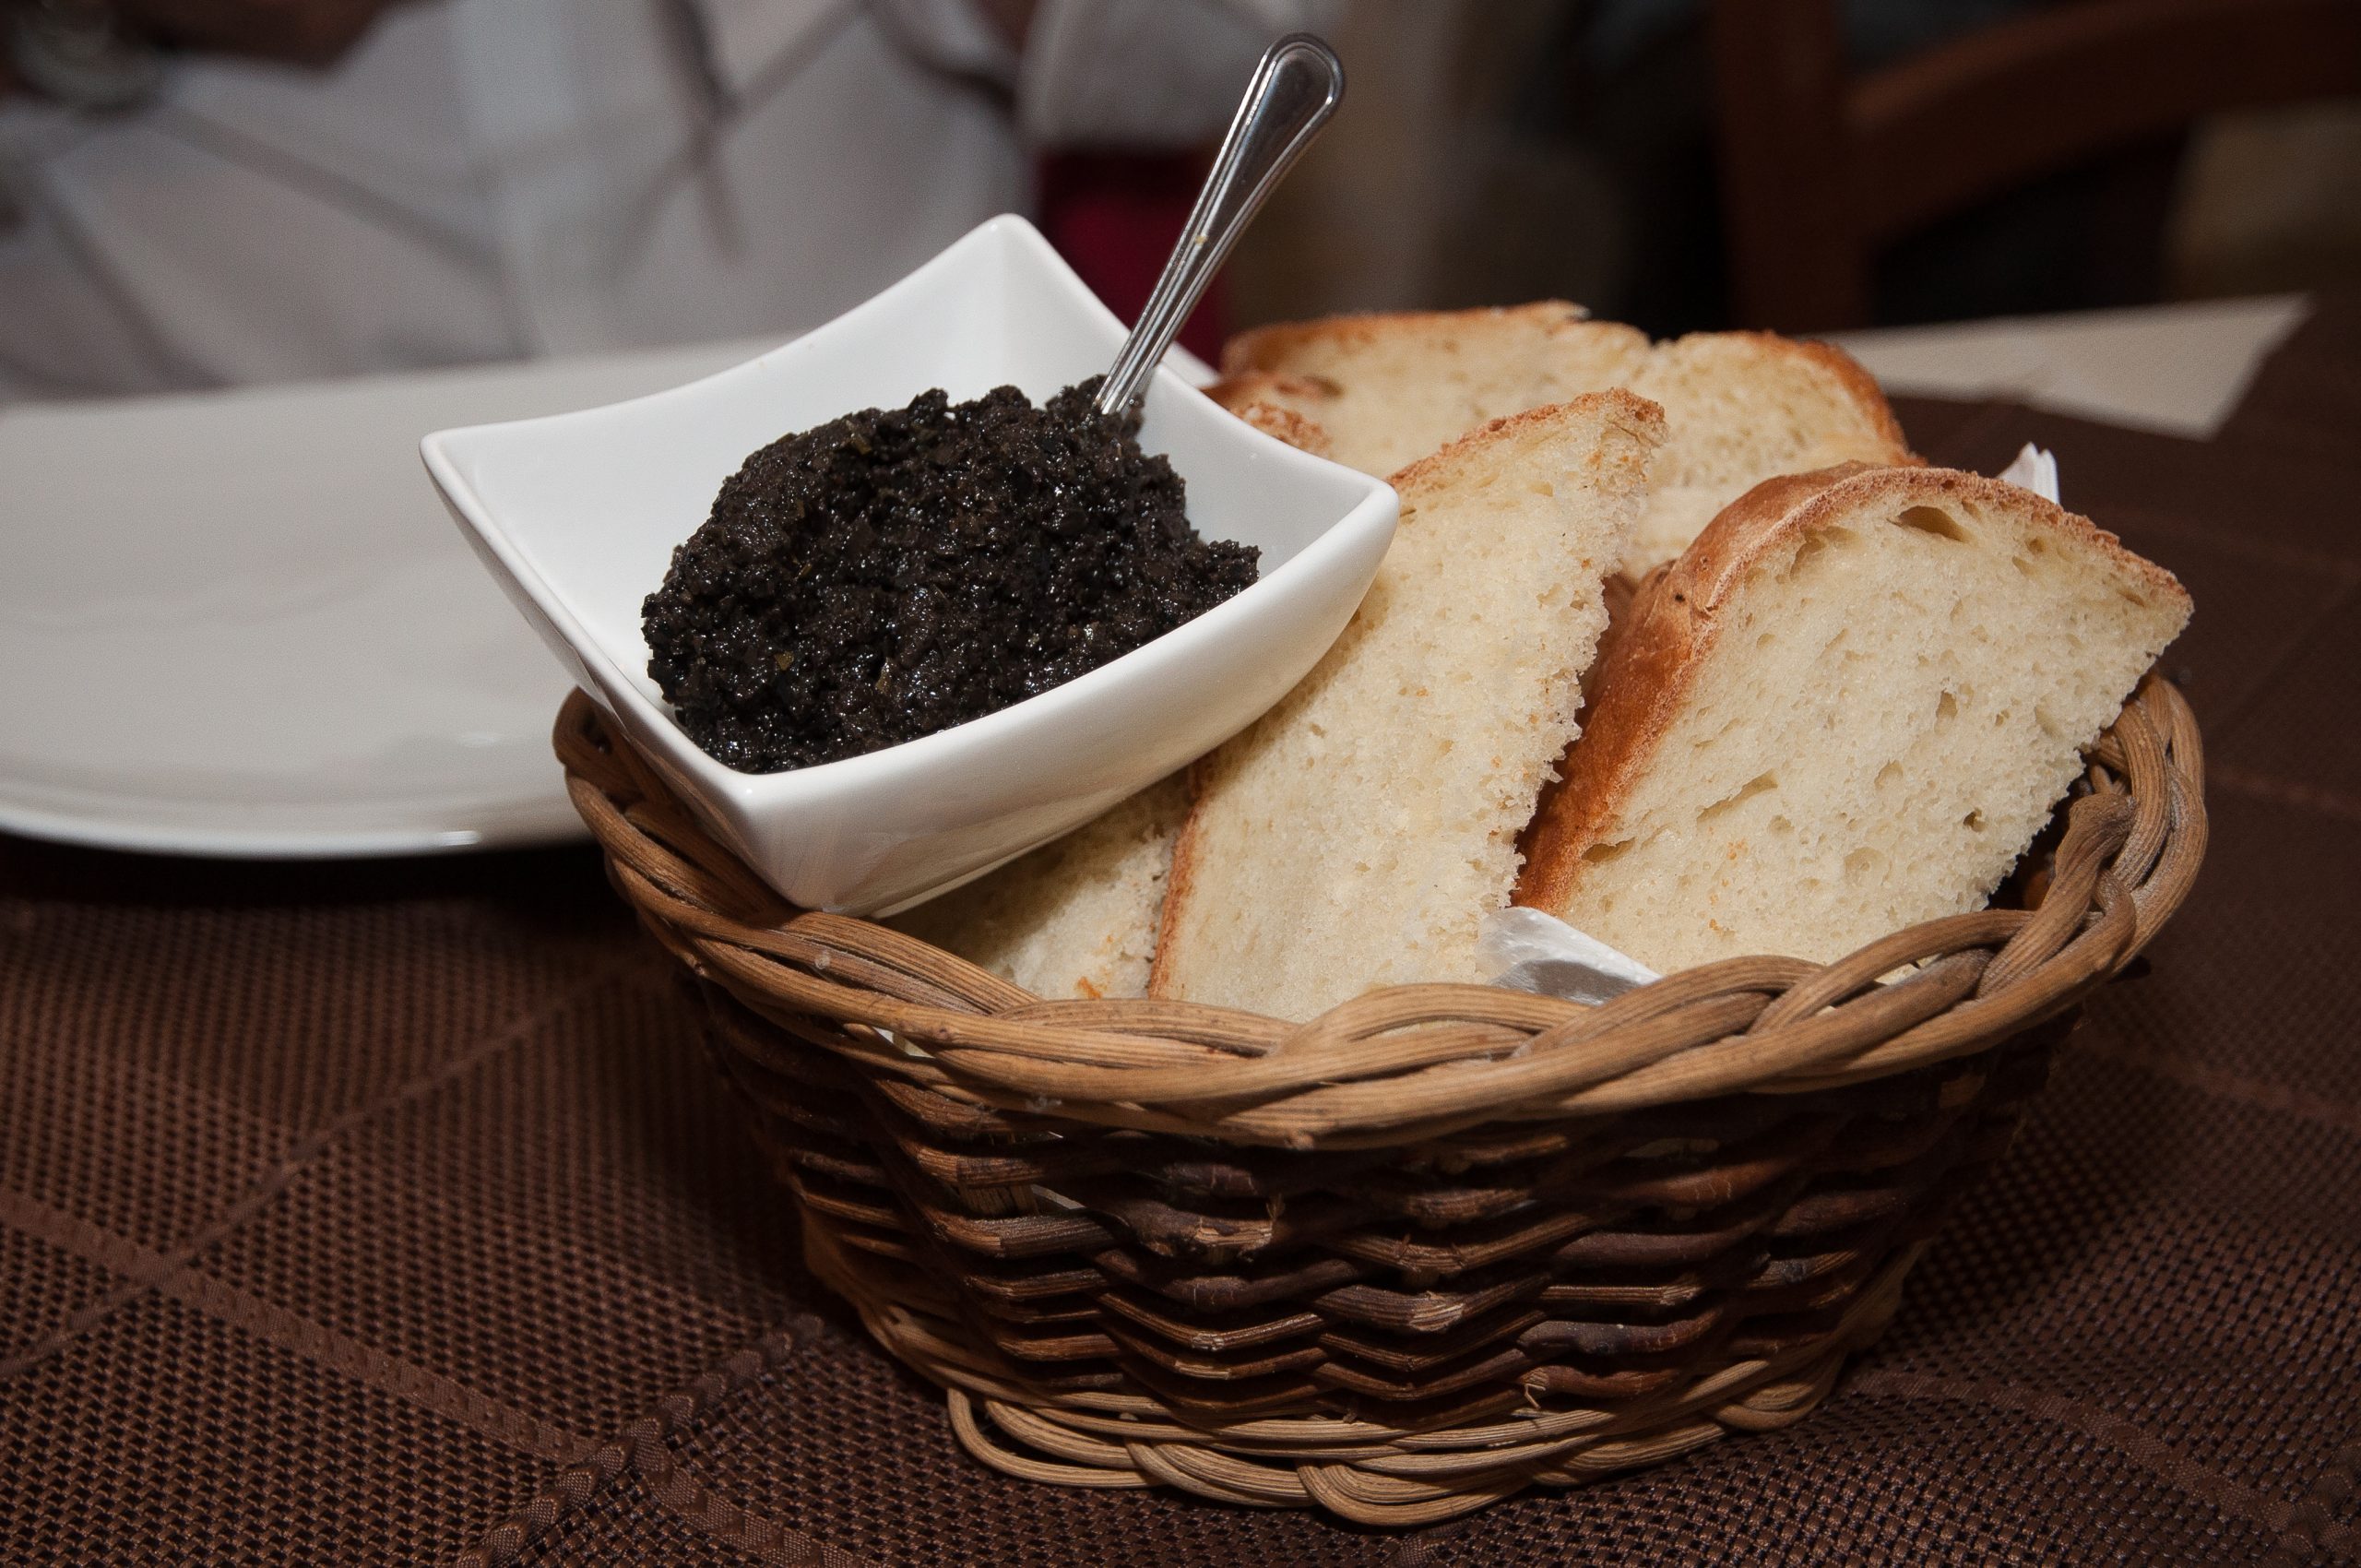 Fresh bread and an olive tapenade-like spread